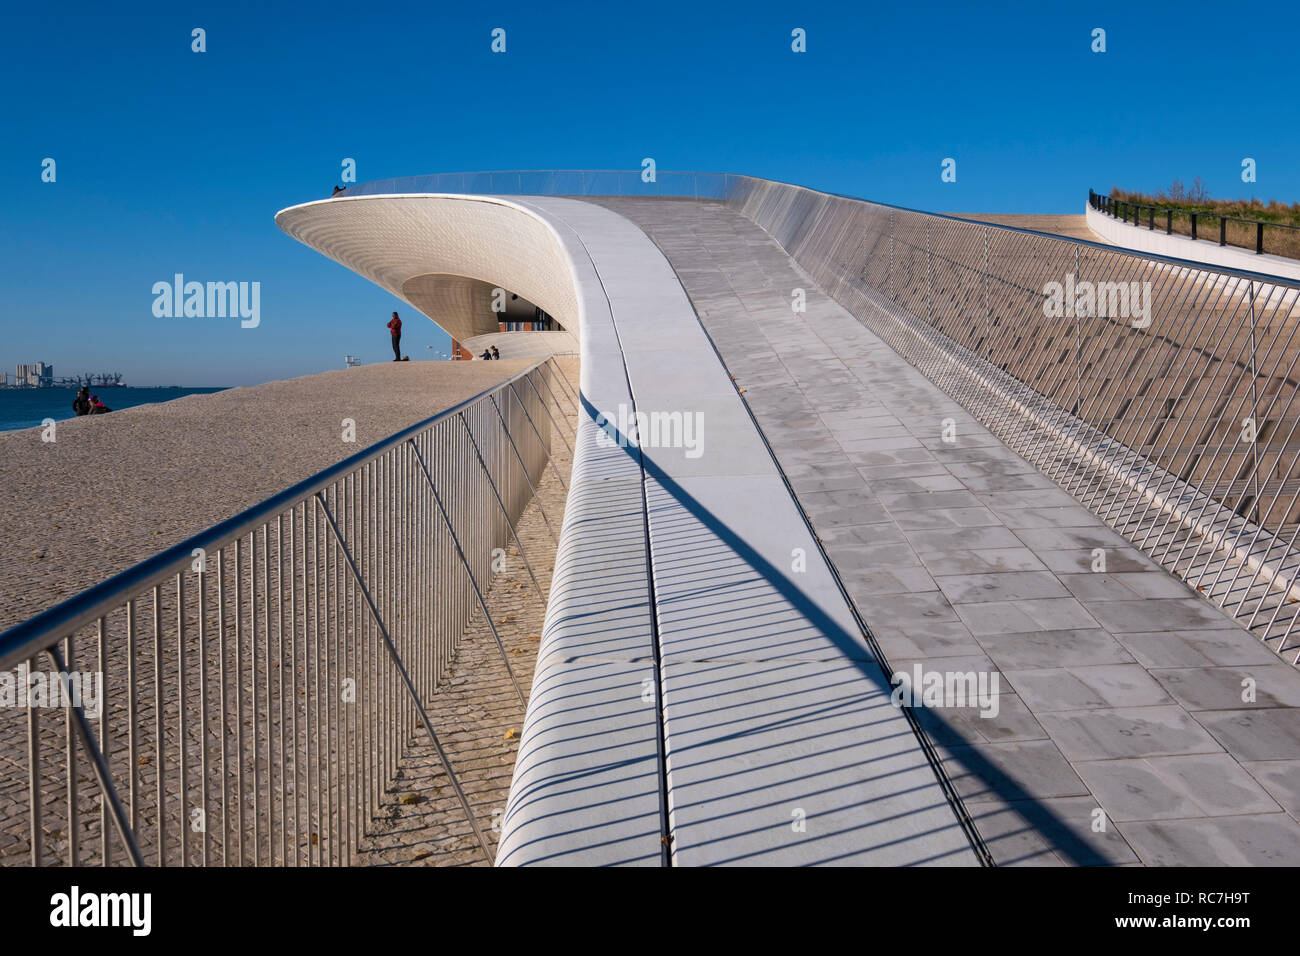 MAAT Museum of Art, Architecture and Technology by architect Amanda Levent, Lisbon, Portugal, Europe Stock Photo